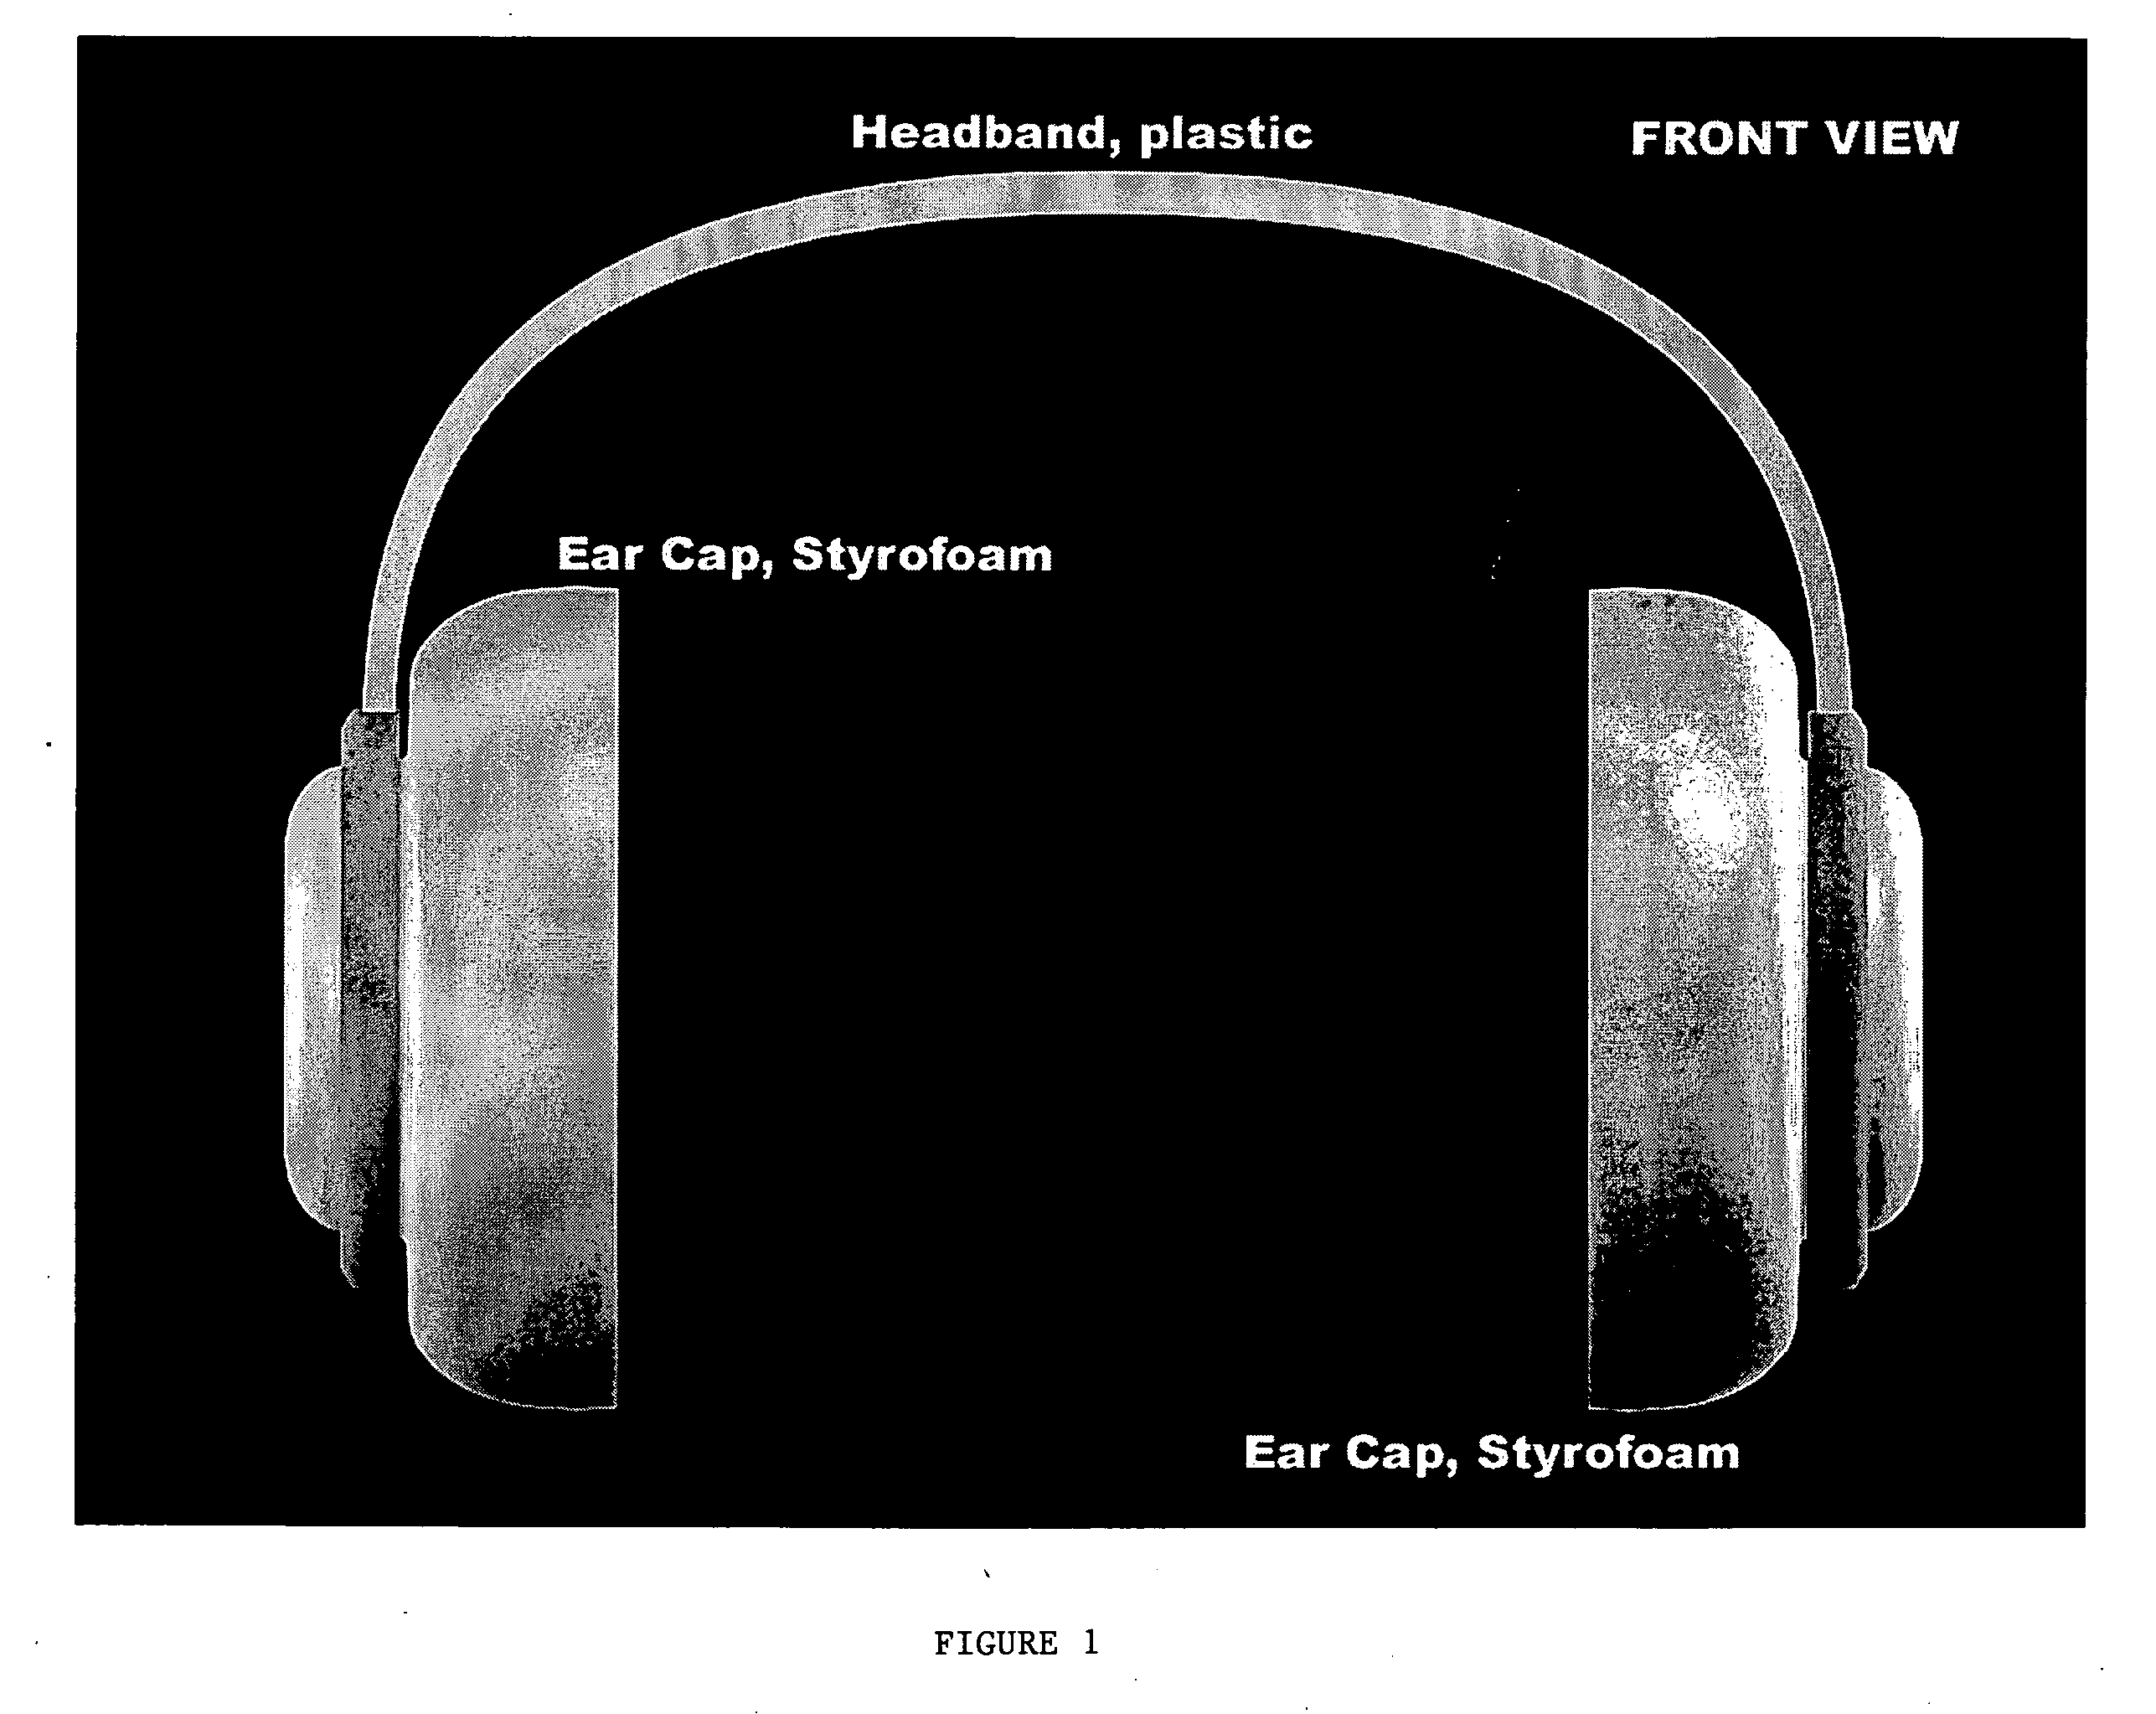 Heat generating therapeutic device for ears